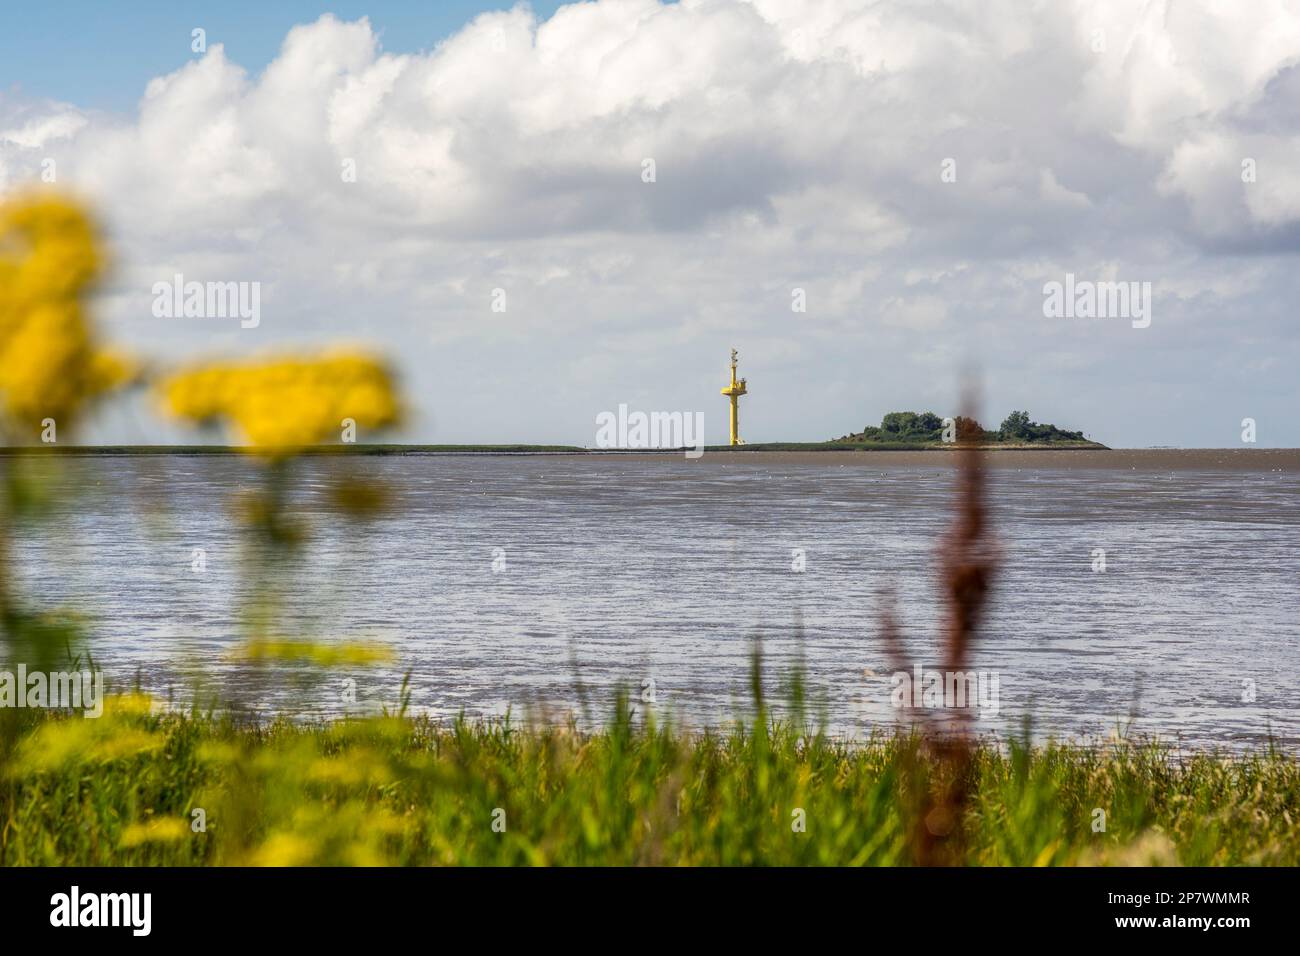 The artificial island of Langlütjen I in the Weser estuary, Germany 2022. Stock Photo